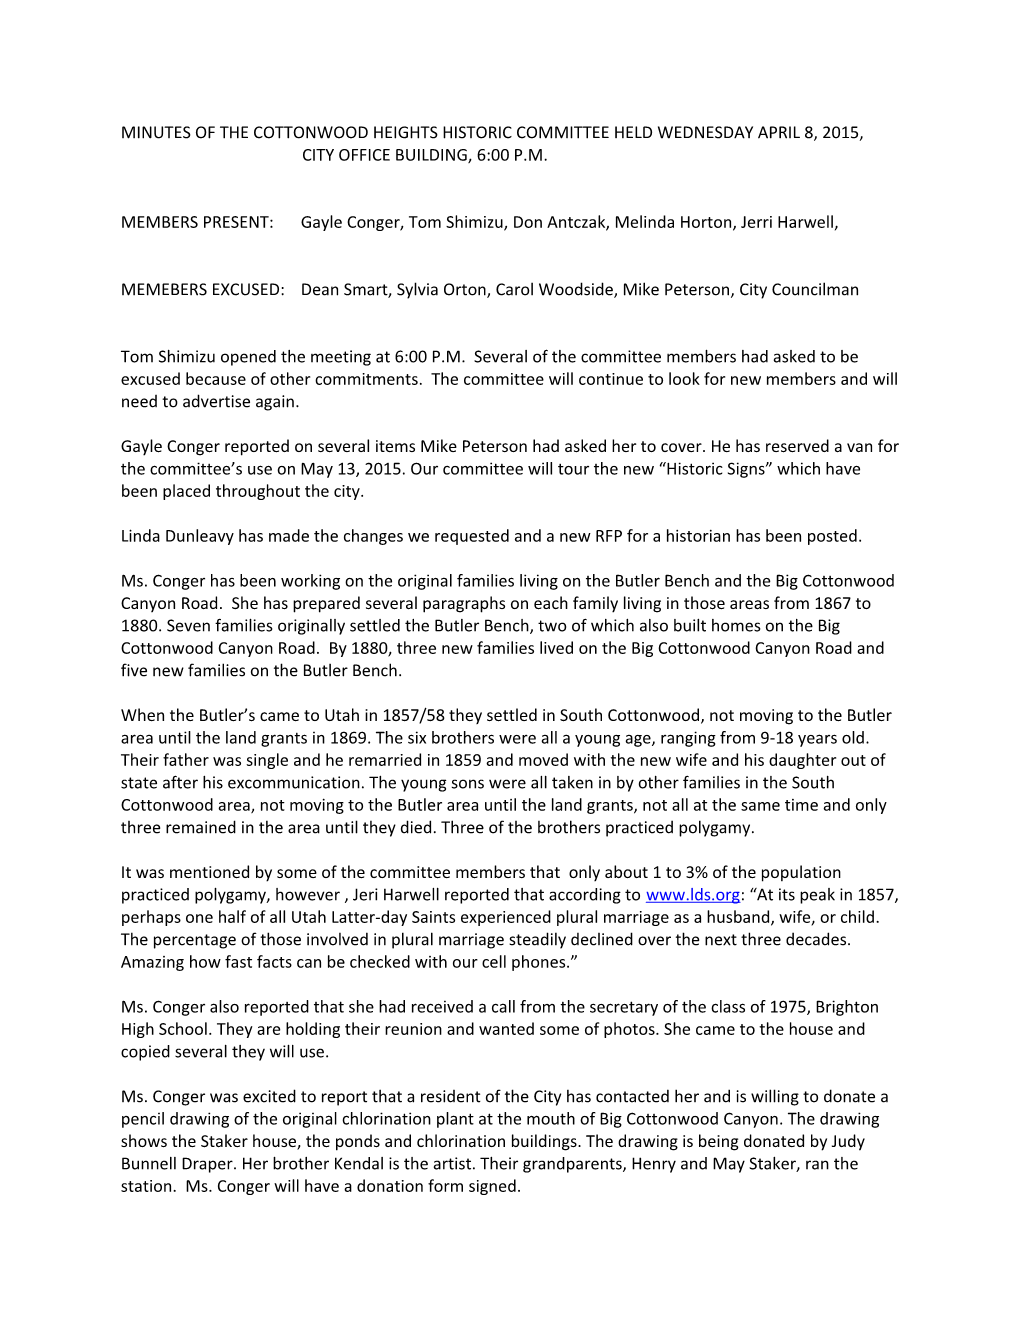 Minutes of the Cottonwood Heights Historic Committee Held Wednesday April 8, 2015